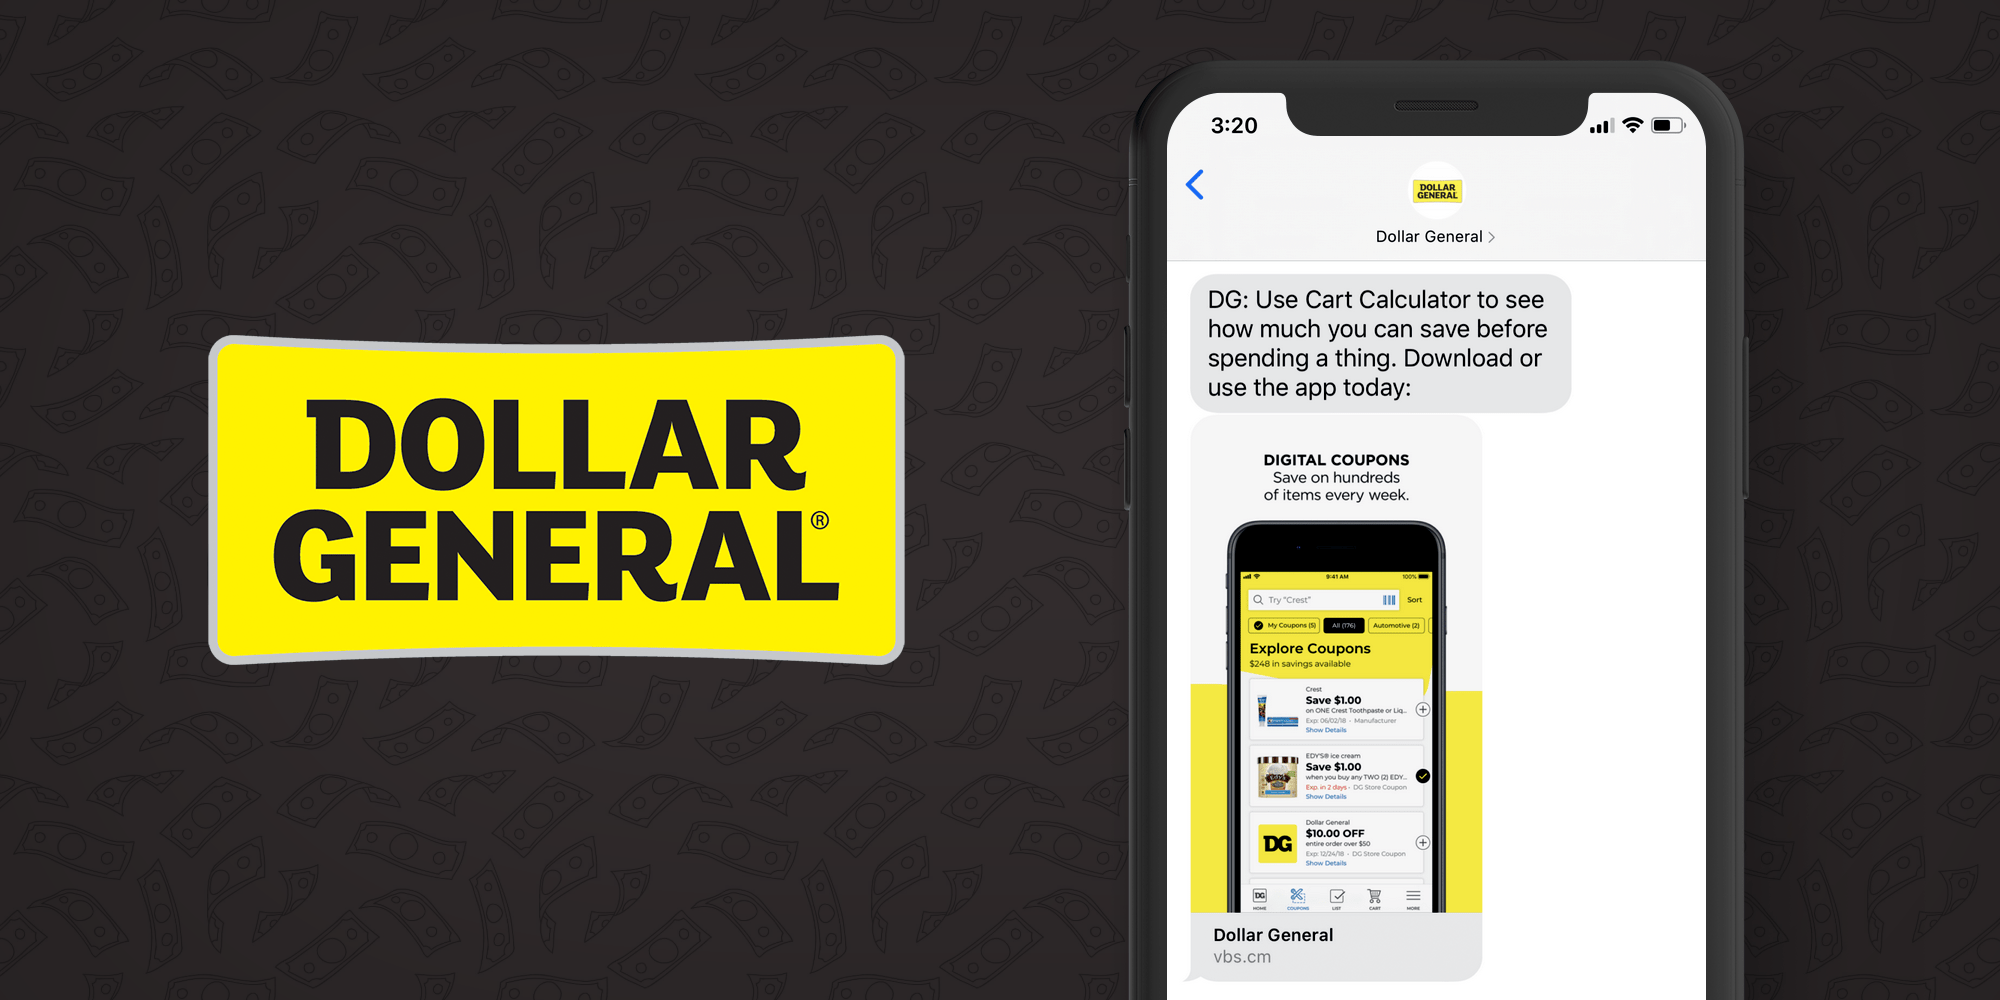 Dollar General SMS Marketing Example - 50 Examples of Brands Using SMS Marketing